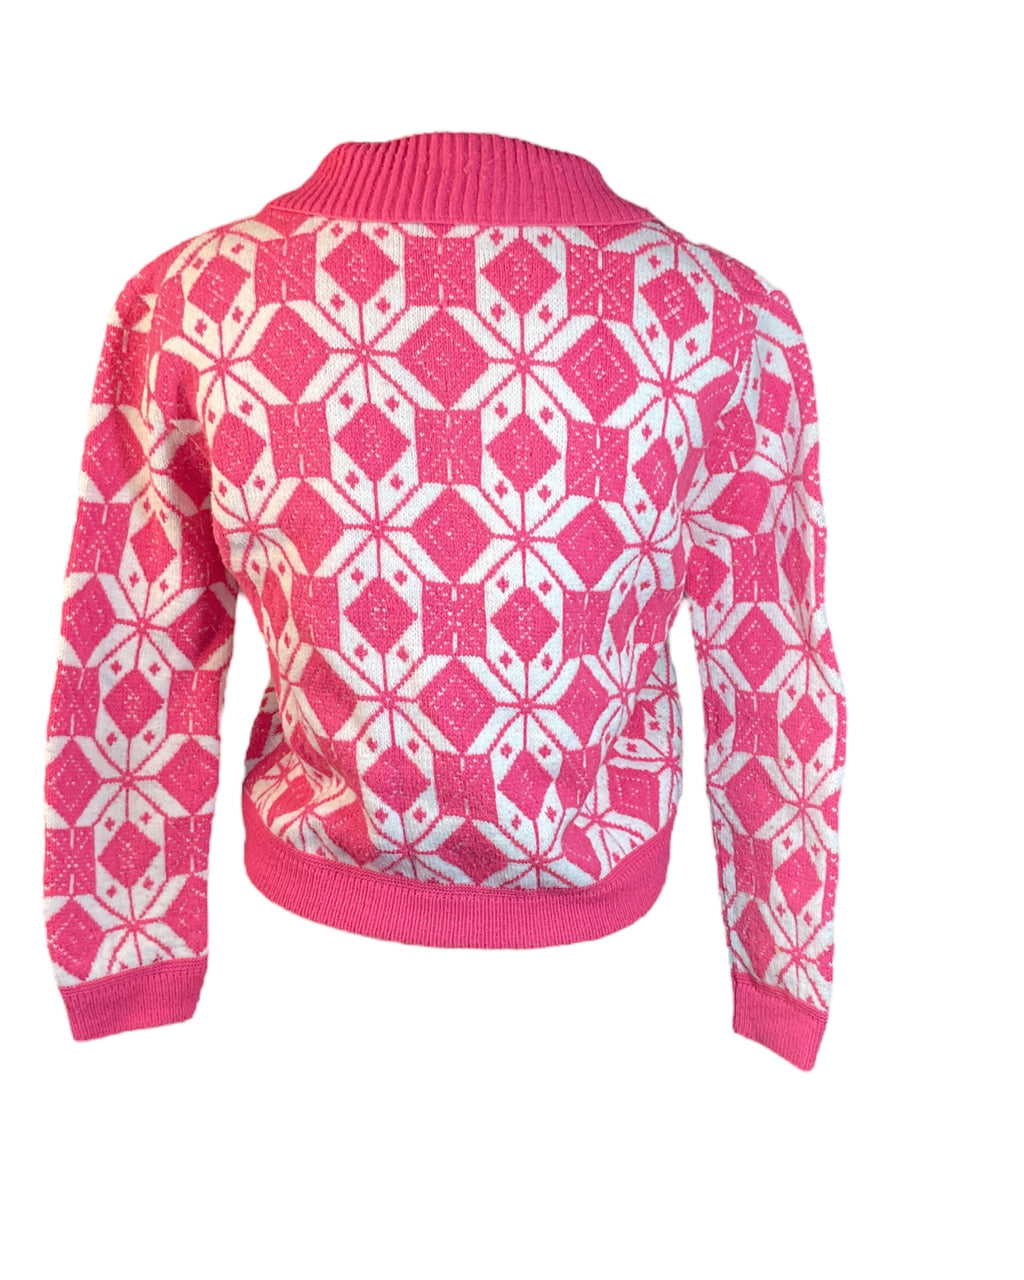 Pink Patterned Collared Cardigan, S